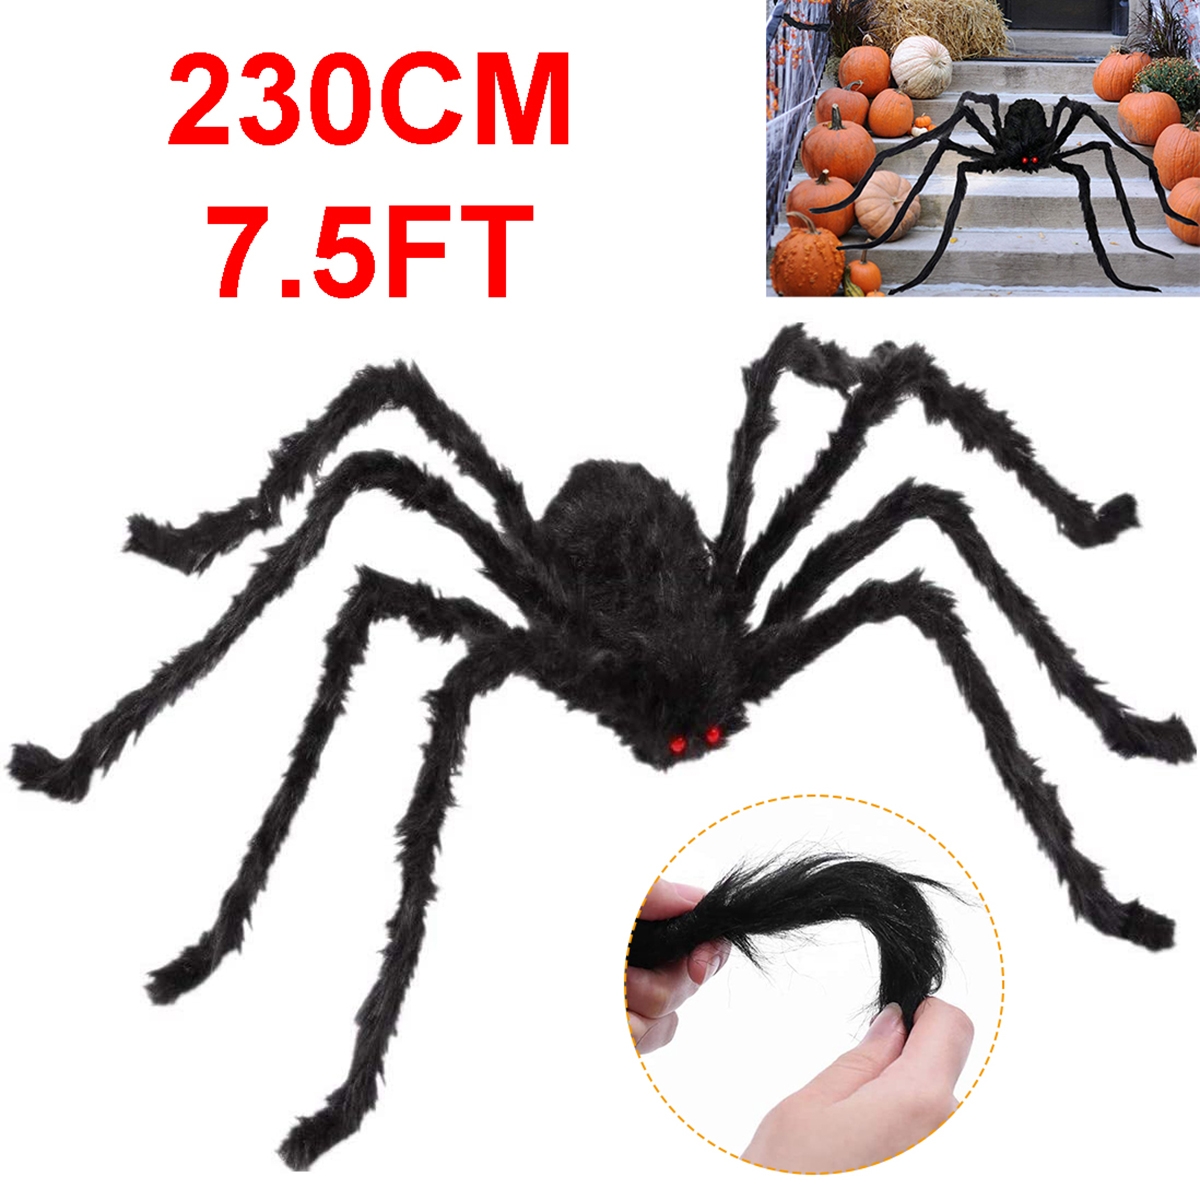 230CM Halloween Giant Spider Black Soft Hairy Scary Spider Toy for Outdoor Yard & Indoor Decoration